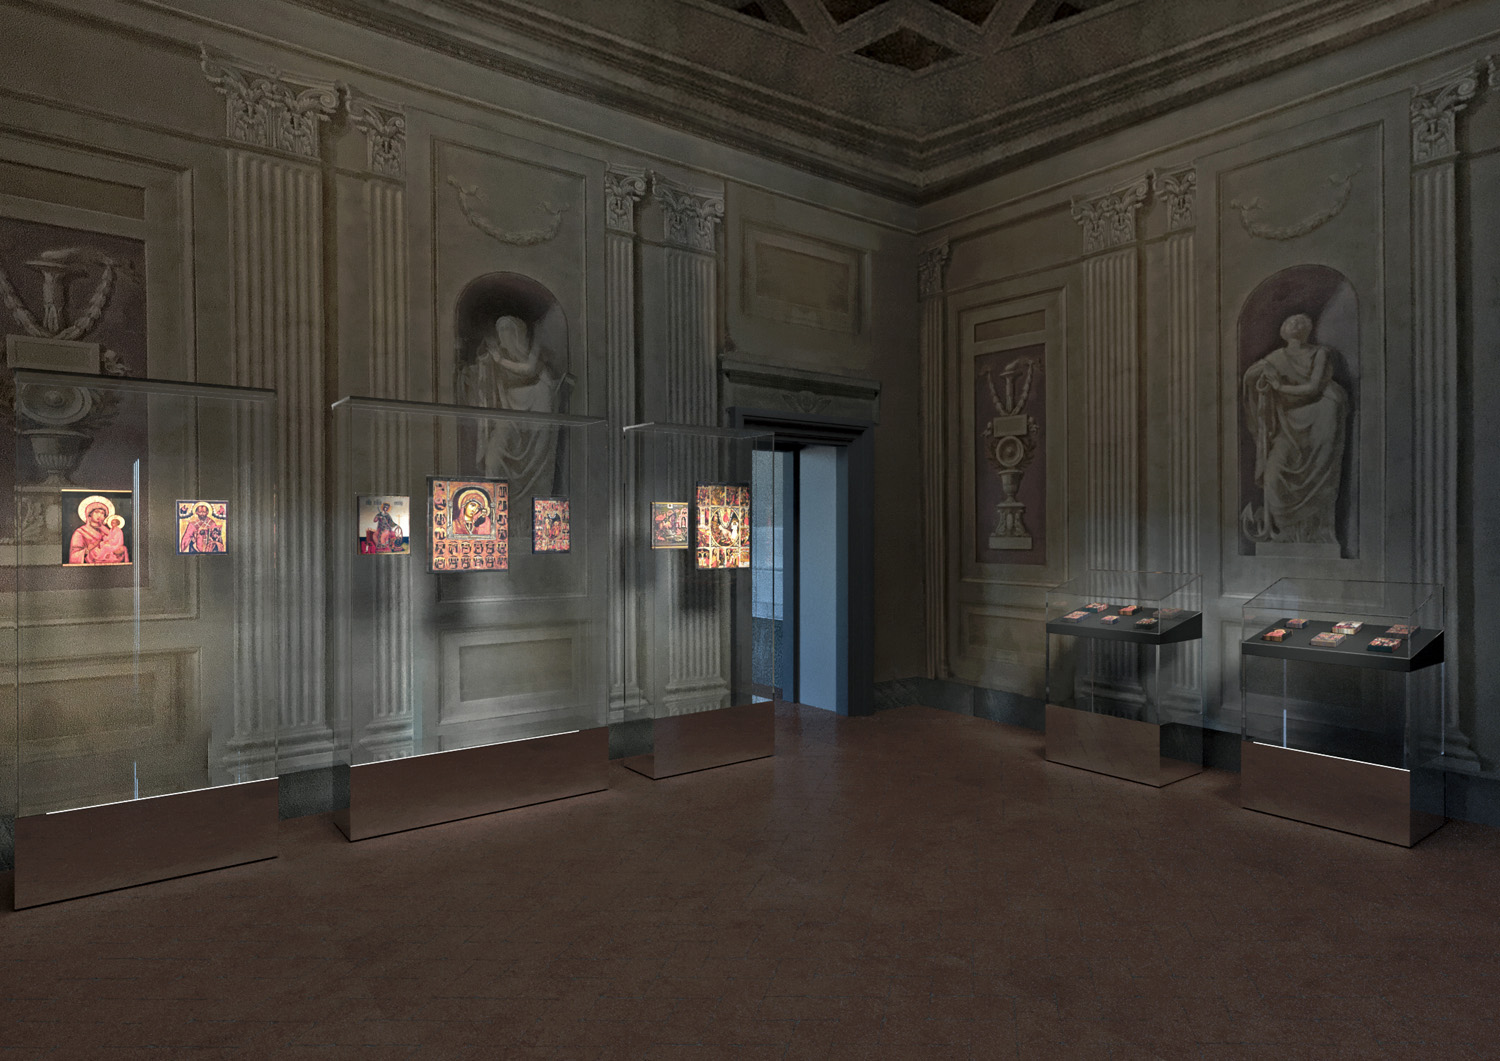 The collections of Icons at Pitti Palace